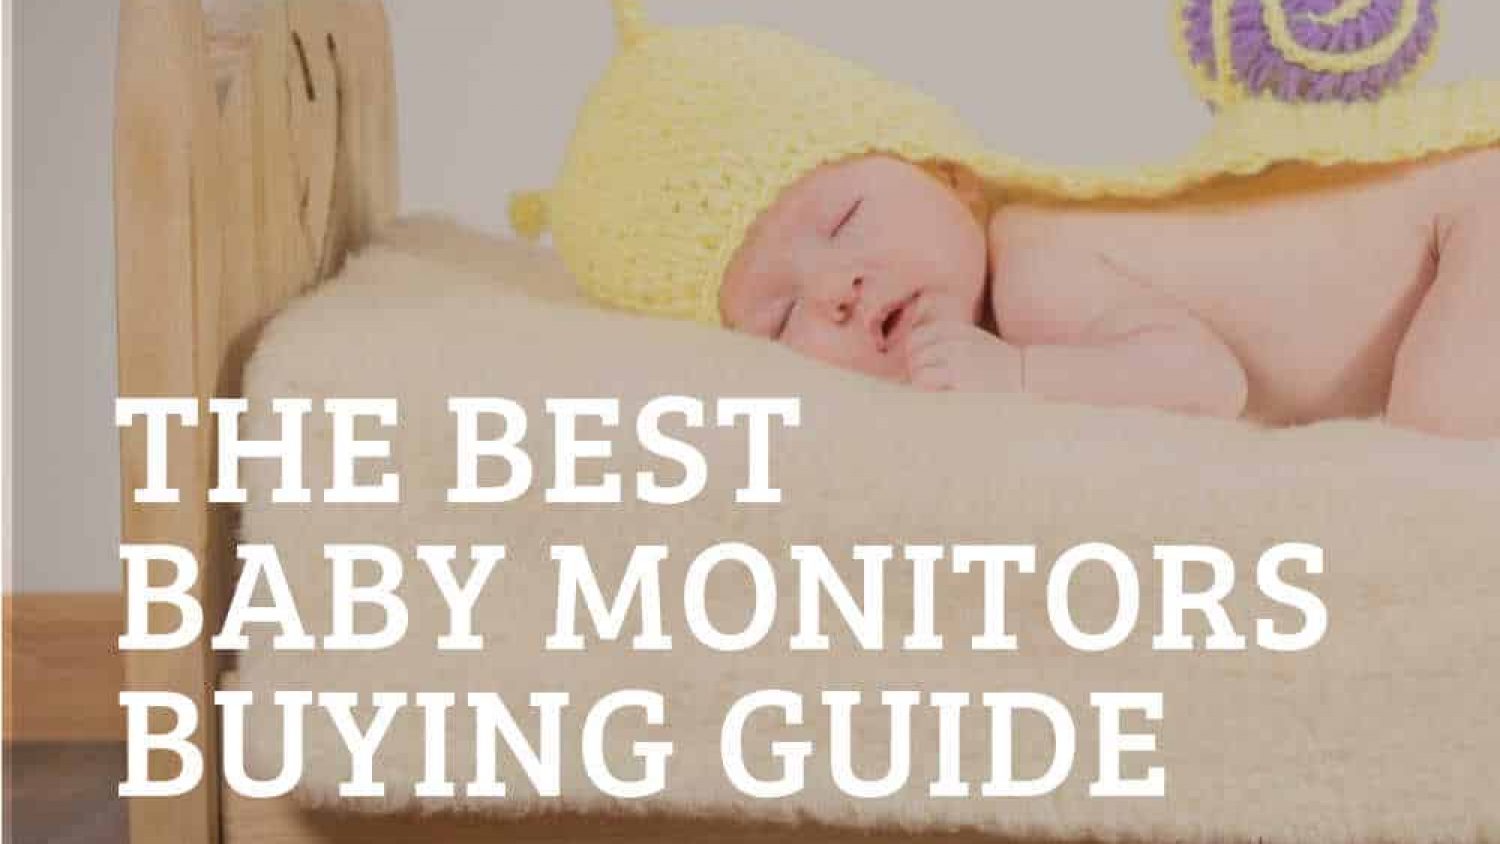 Best Baby Monitors: Tips & Tricks to Keeping an Eye on the Little Ones!